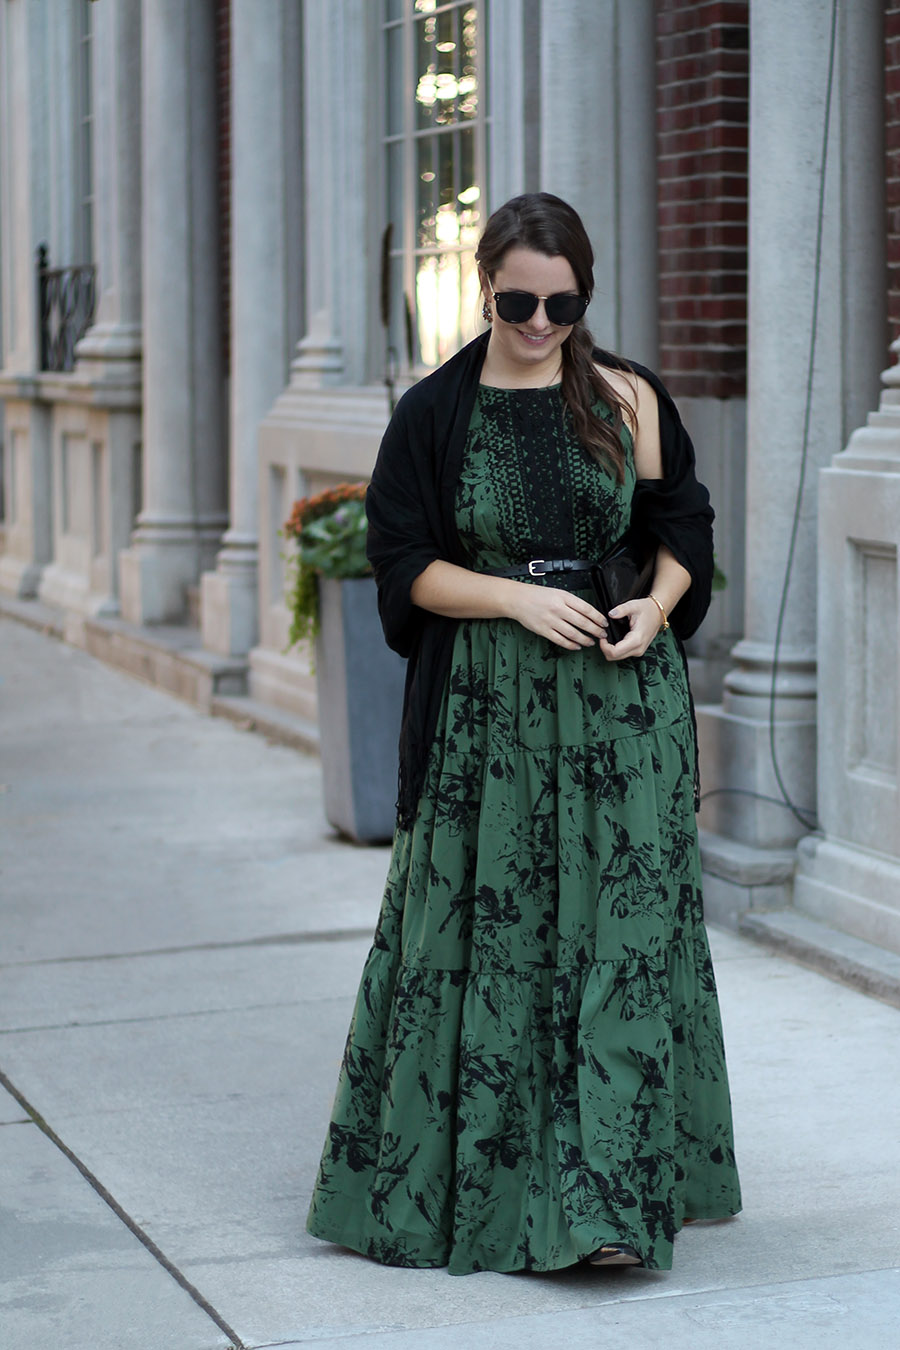 Outfit // How To Dress Up A Maxi Dress For A Date Night Look